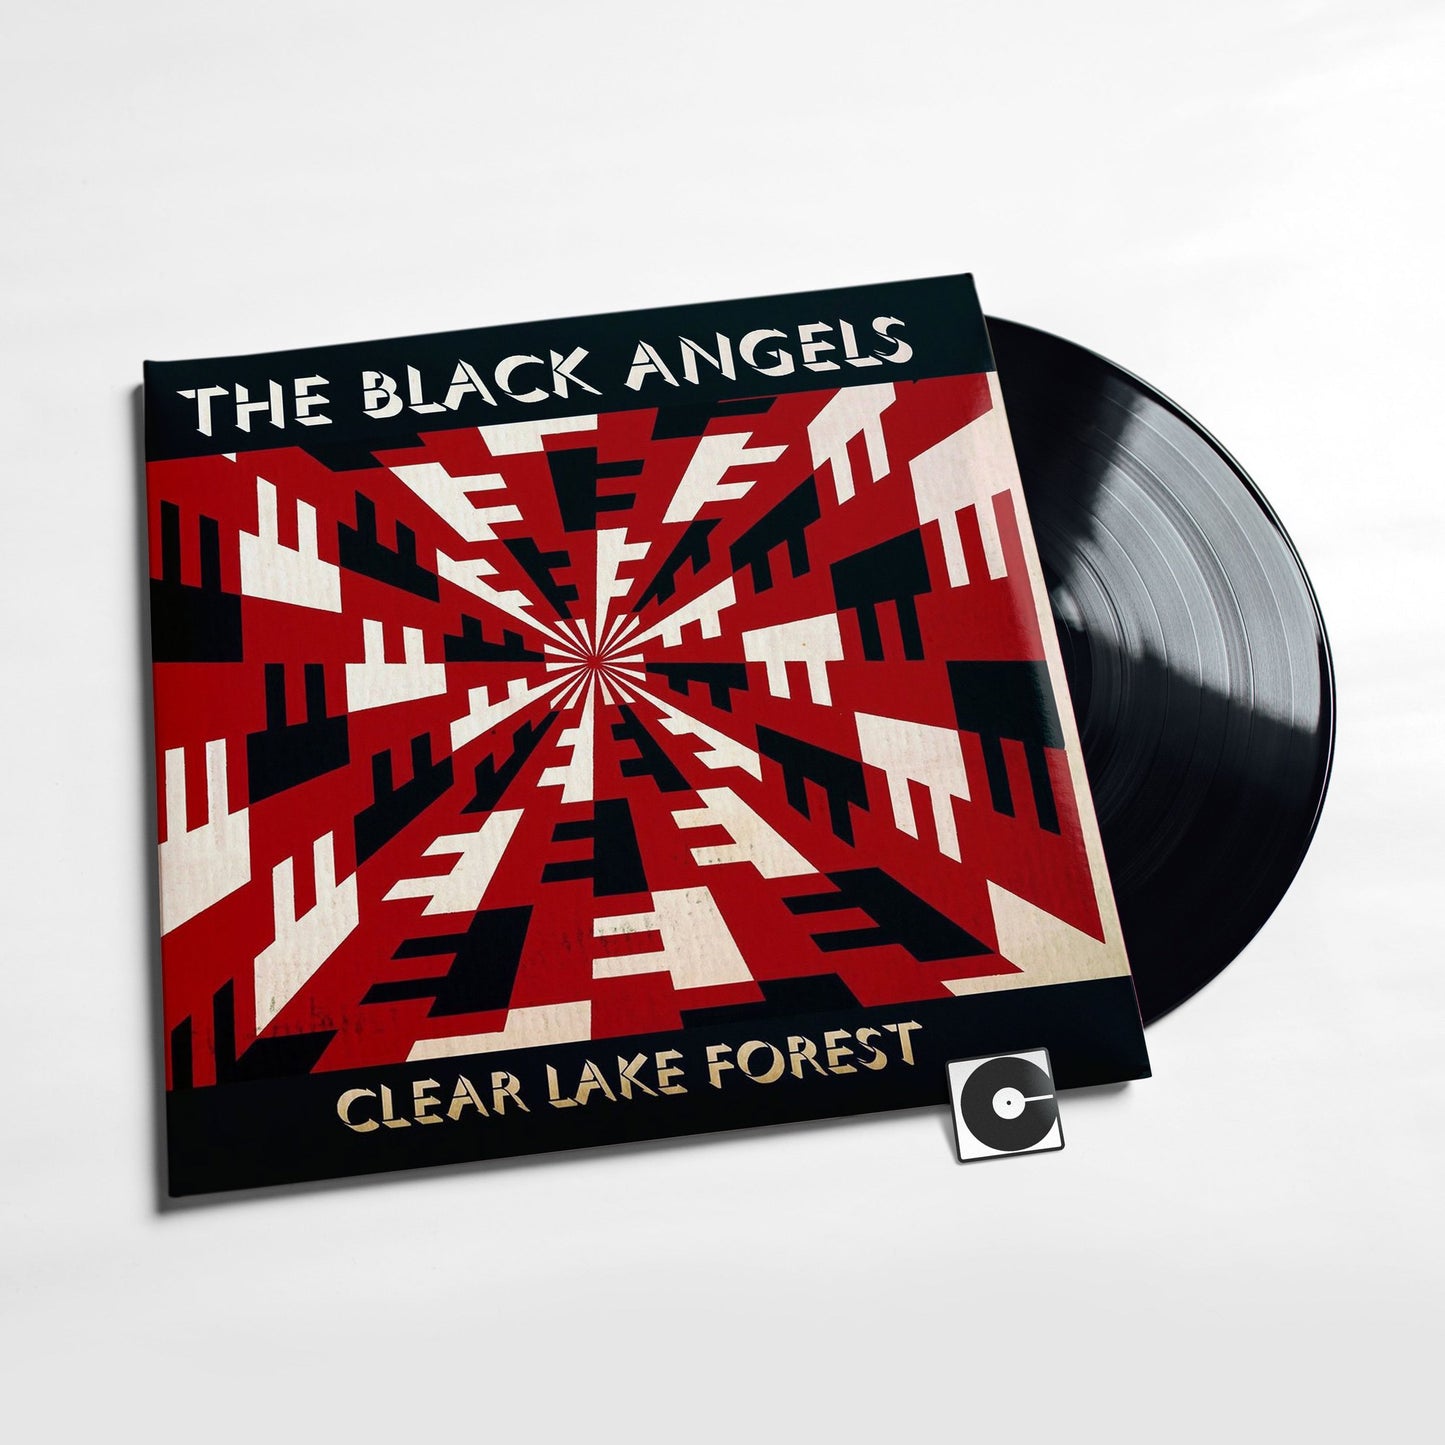 The Black Angels - "Clear Lake Forest"